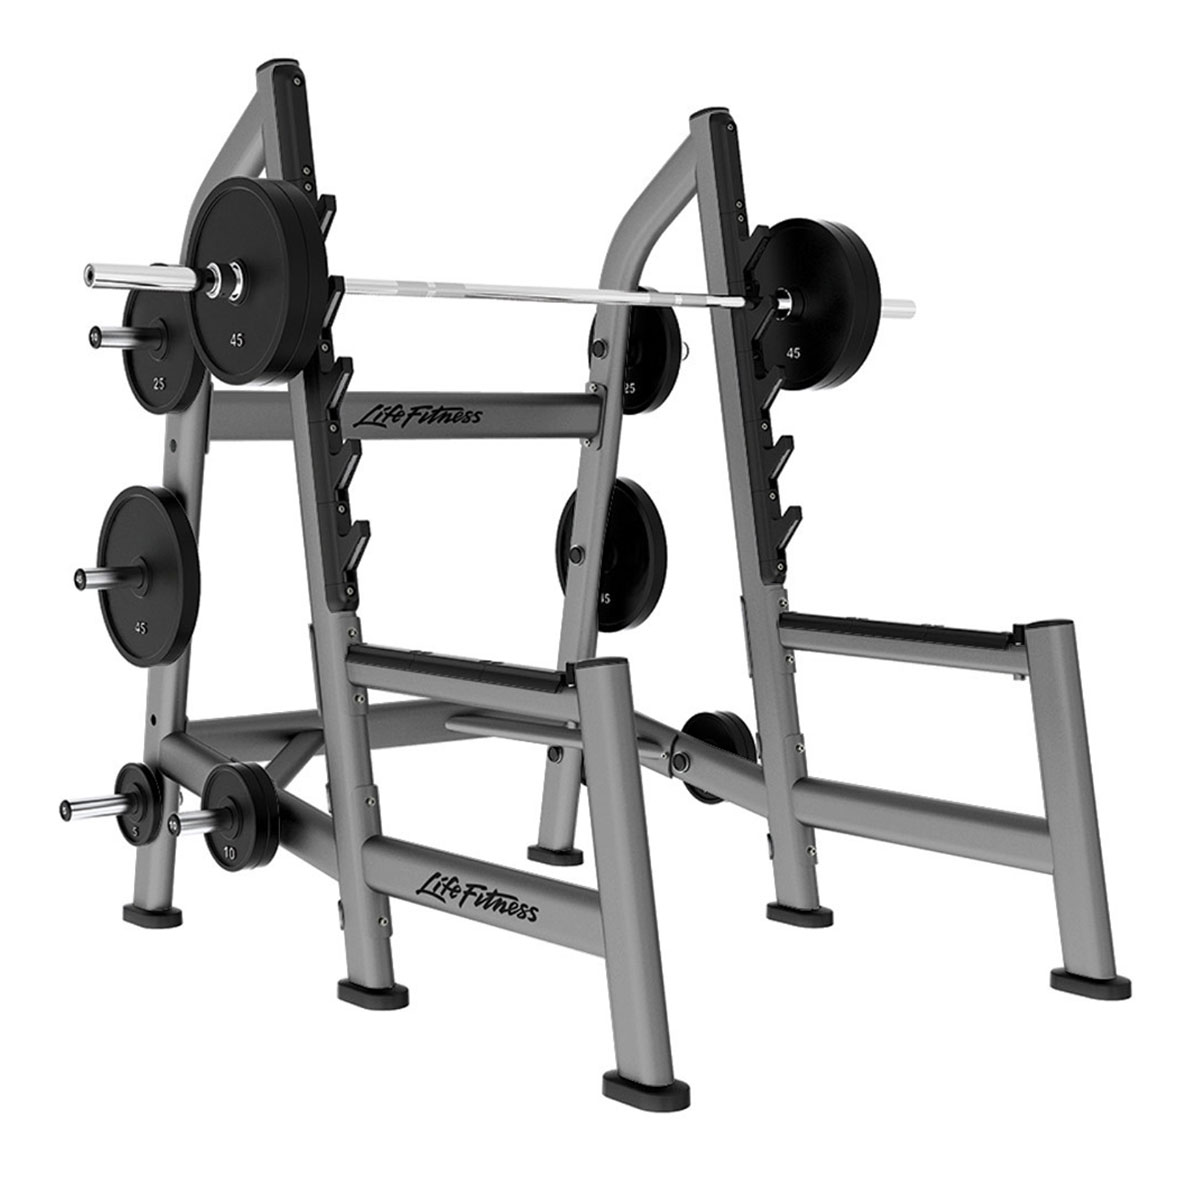 Fitness Signature Series Olympic Squat Rack | Used Gym Equipment